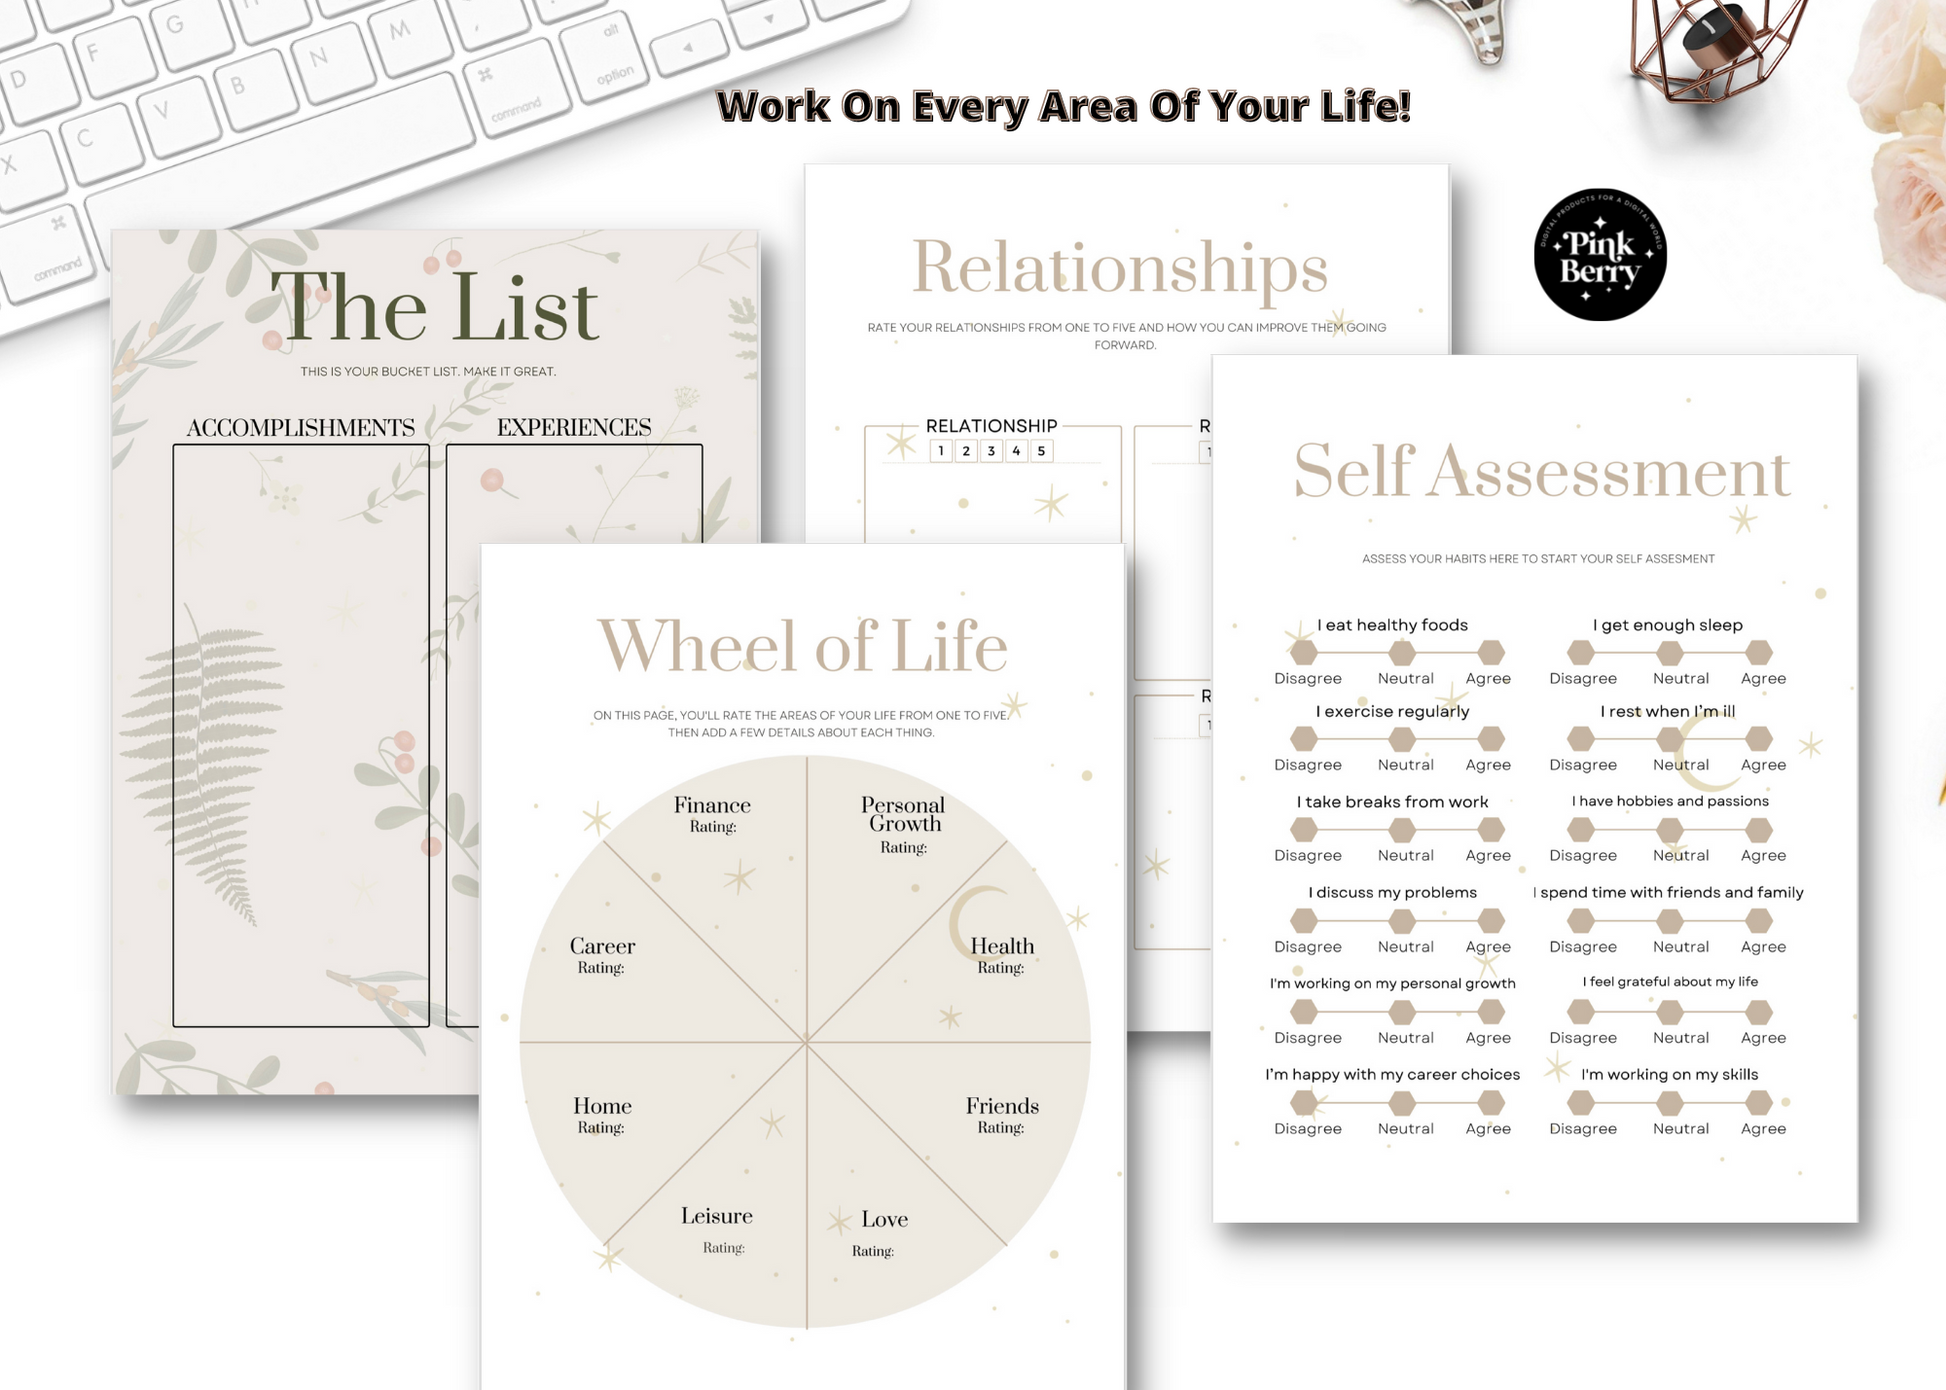 Tarot Planner Printable, Manifest Your Dreams, Law of Attraction